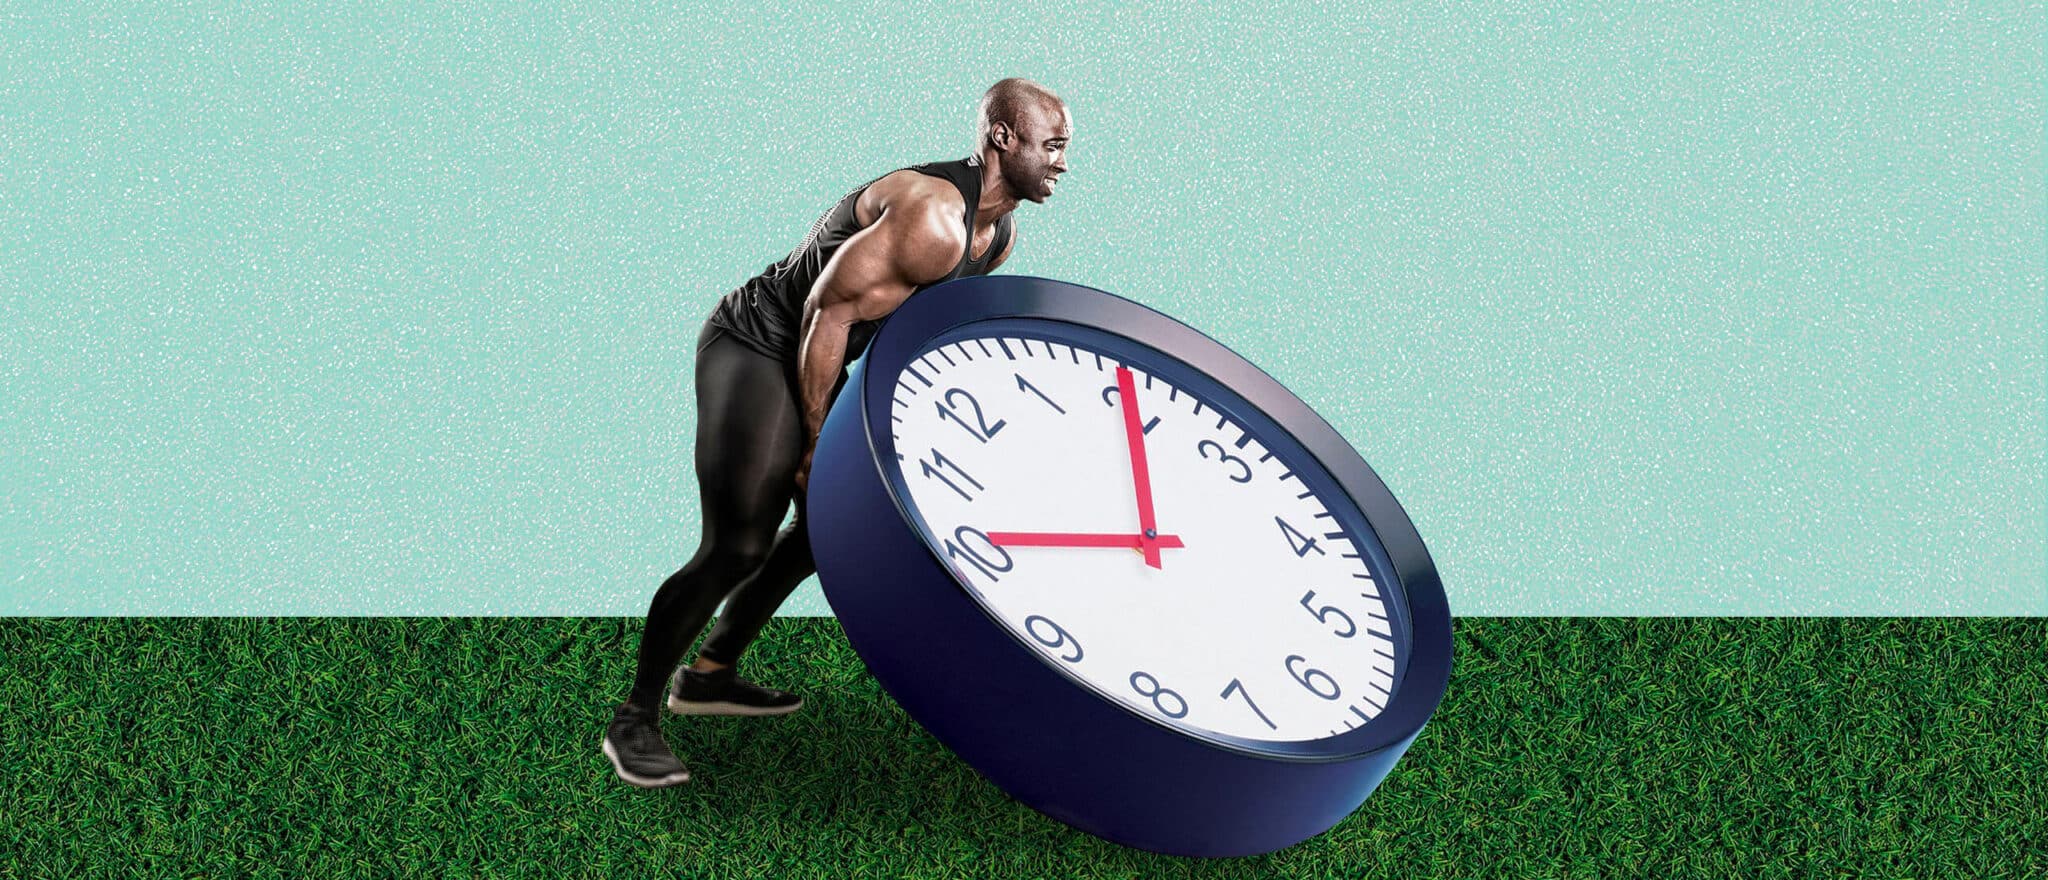 There Are Plenty of Natural Ways to Boost Testosterone. Intermittent Fasting Isn’t One of Them.